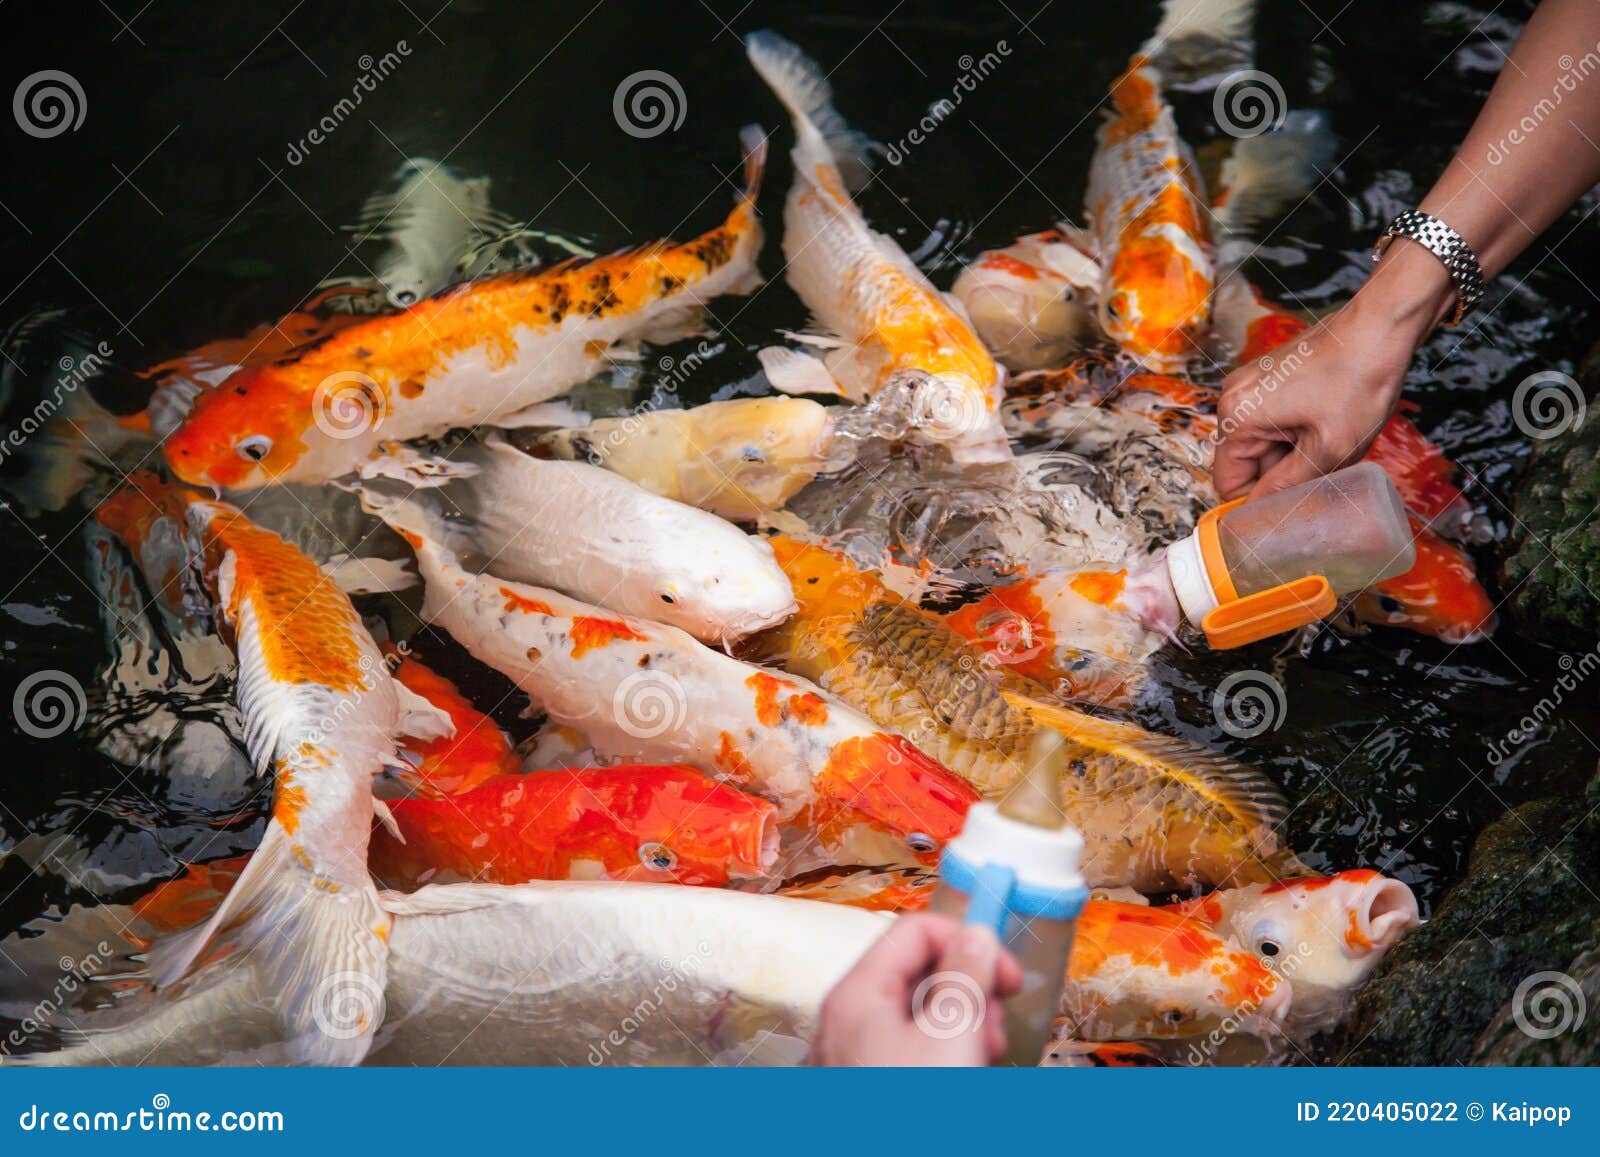 Feeding Koi Fish From A Baby Bottle Stock Photo Image Of Fish Multi